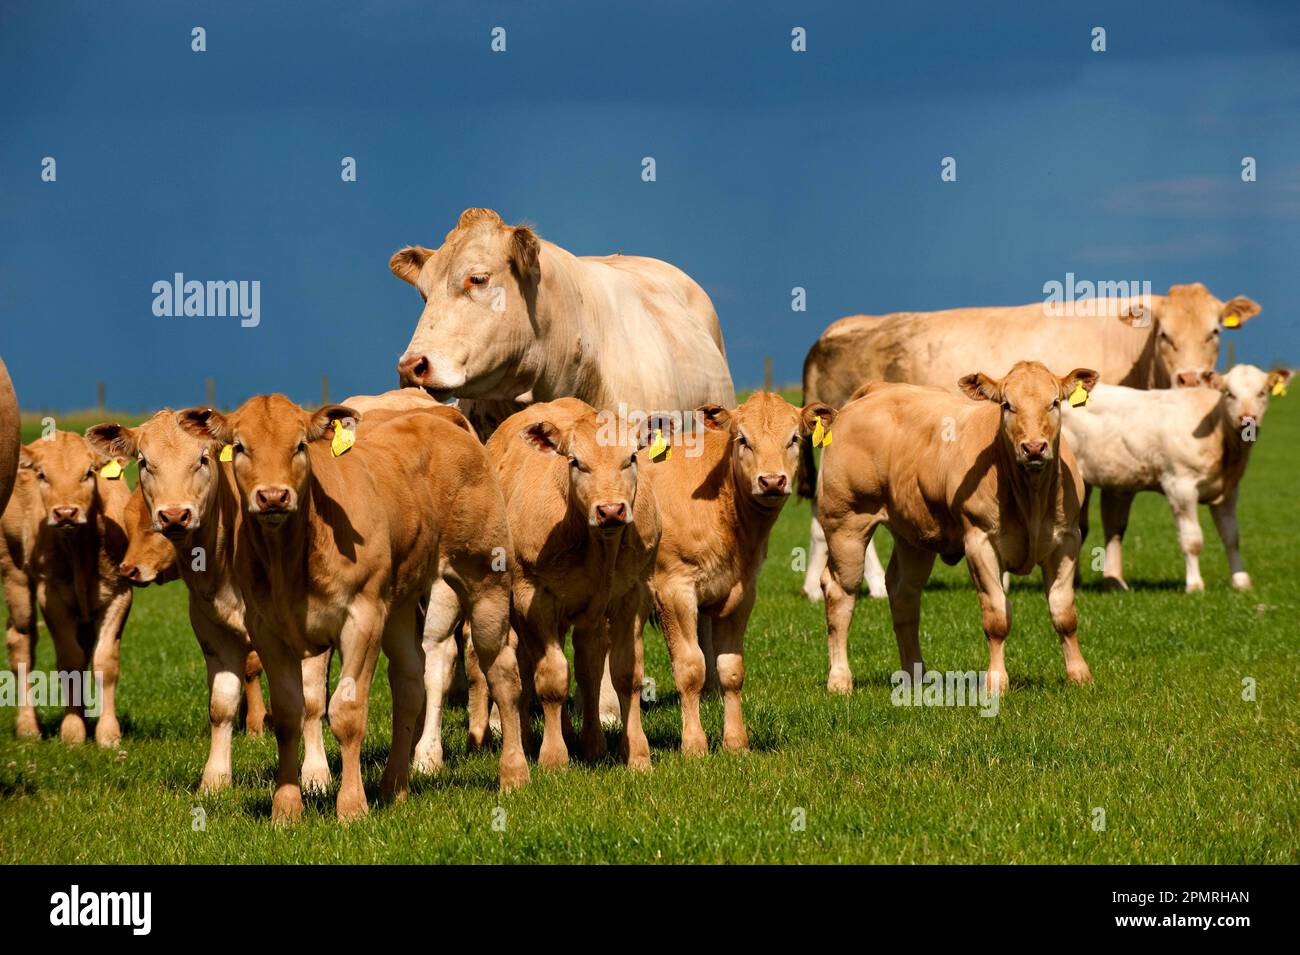 Domestic cattle, Blonde d'Aquitaine, cows with calves, herd standing on pasture, England, United Kingdom Stock Photo